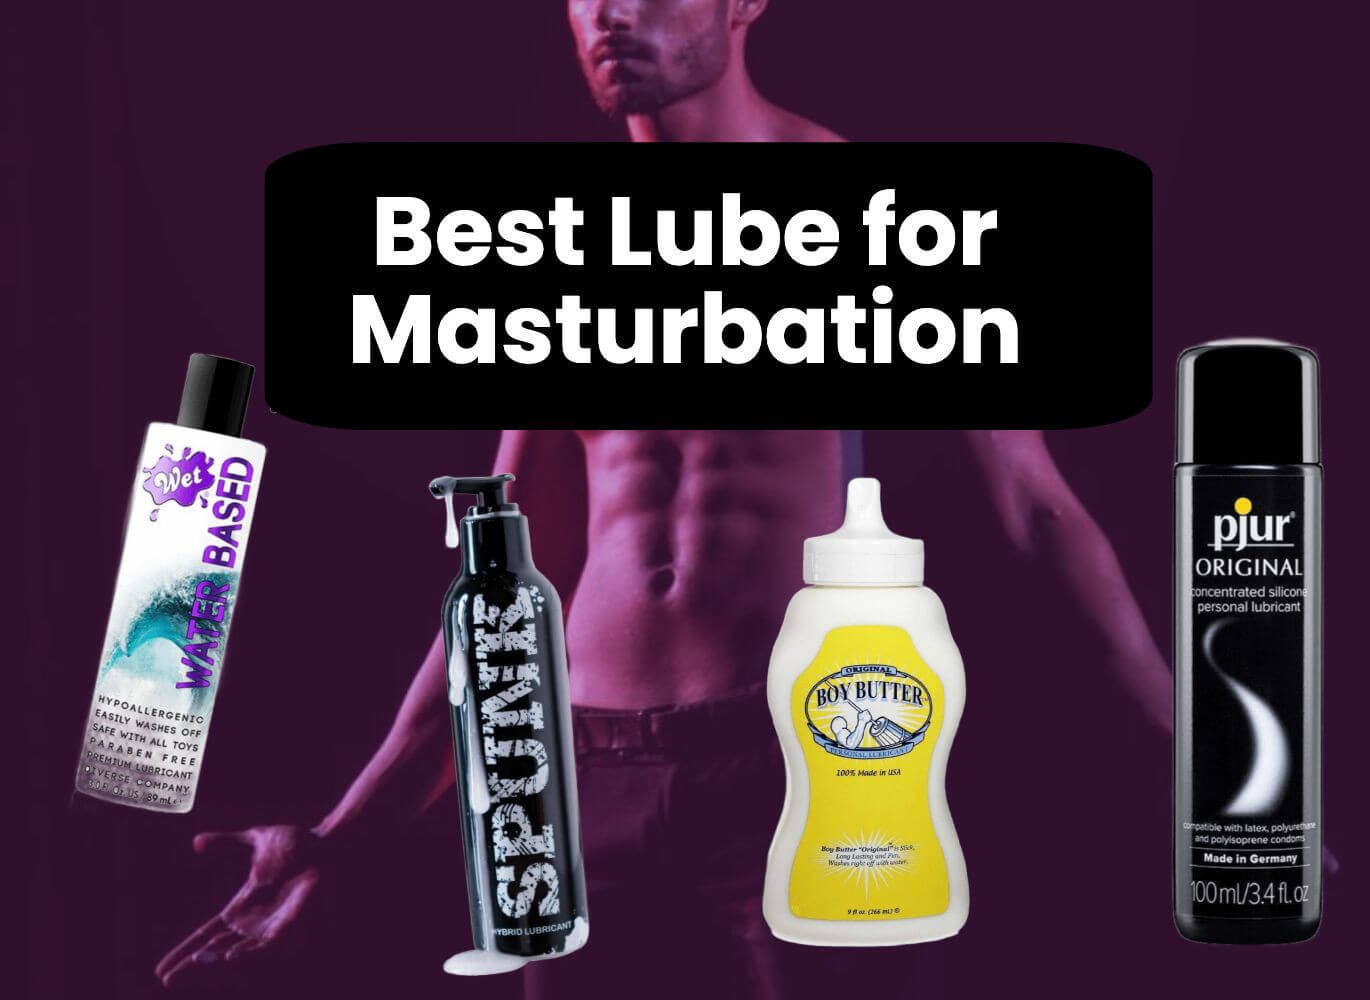 brian humes recommends best jerk off lotion pic